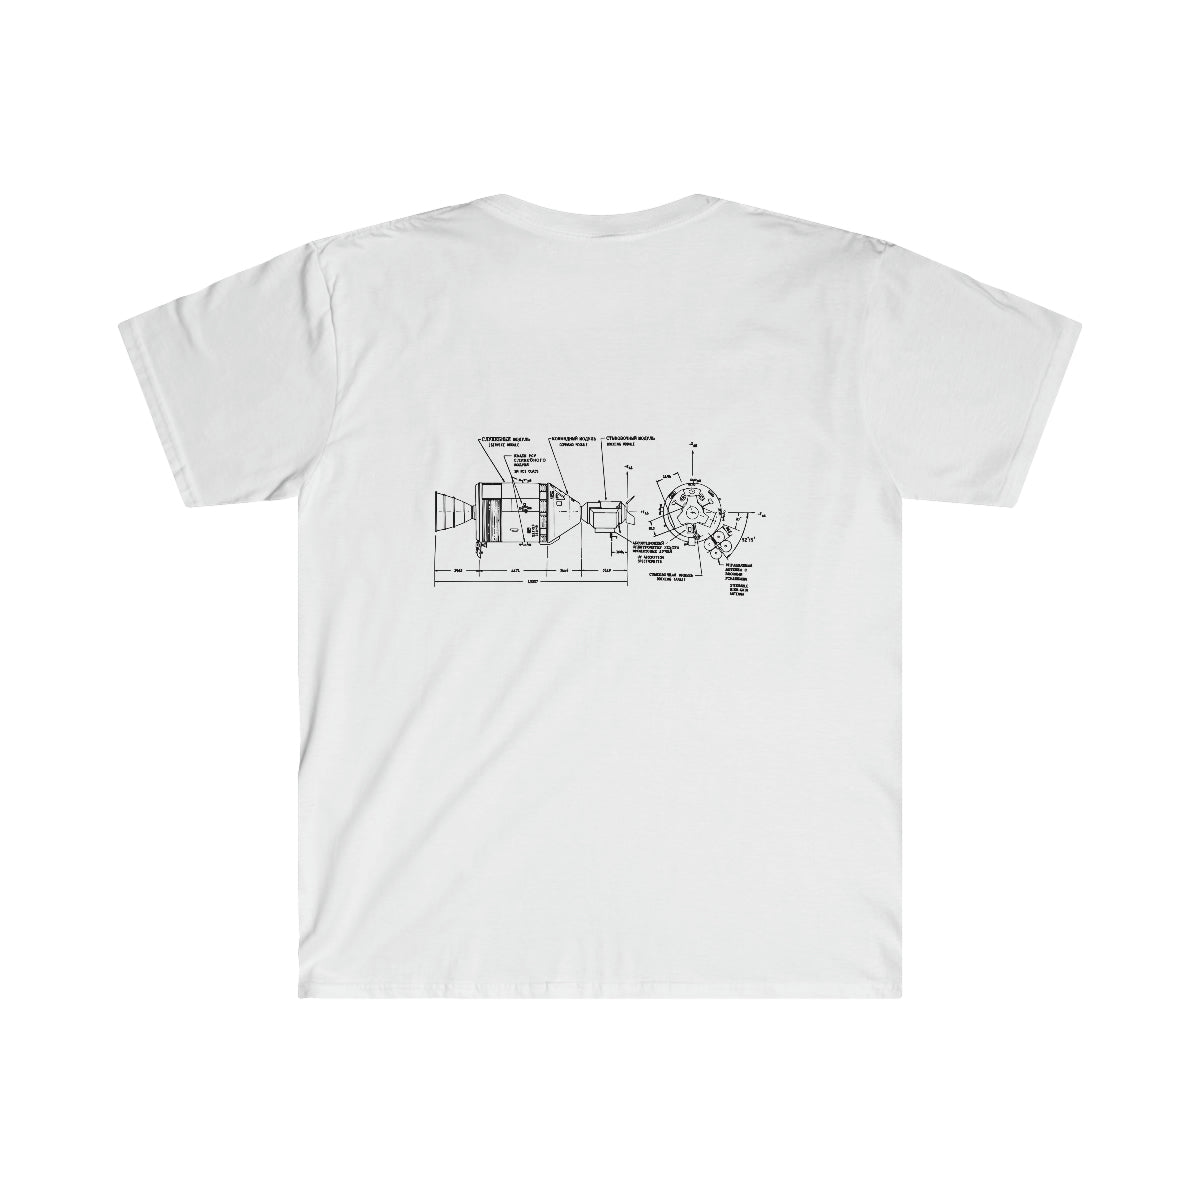 A white Deep Space Shuttle t-shirt with a drawing of a machine by One Tee Project.